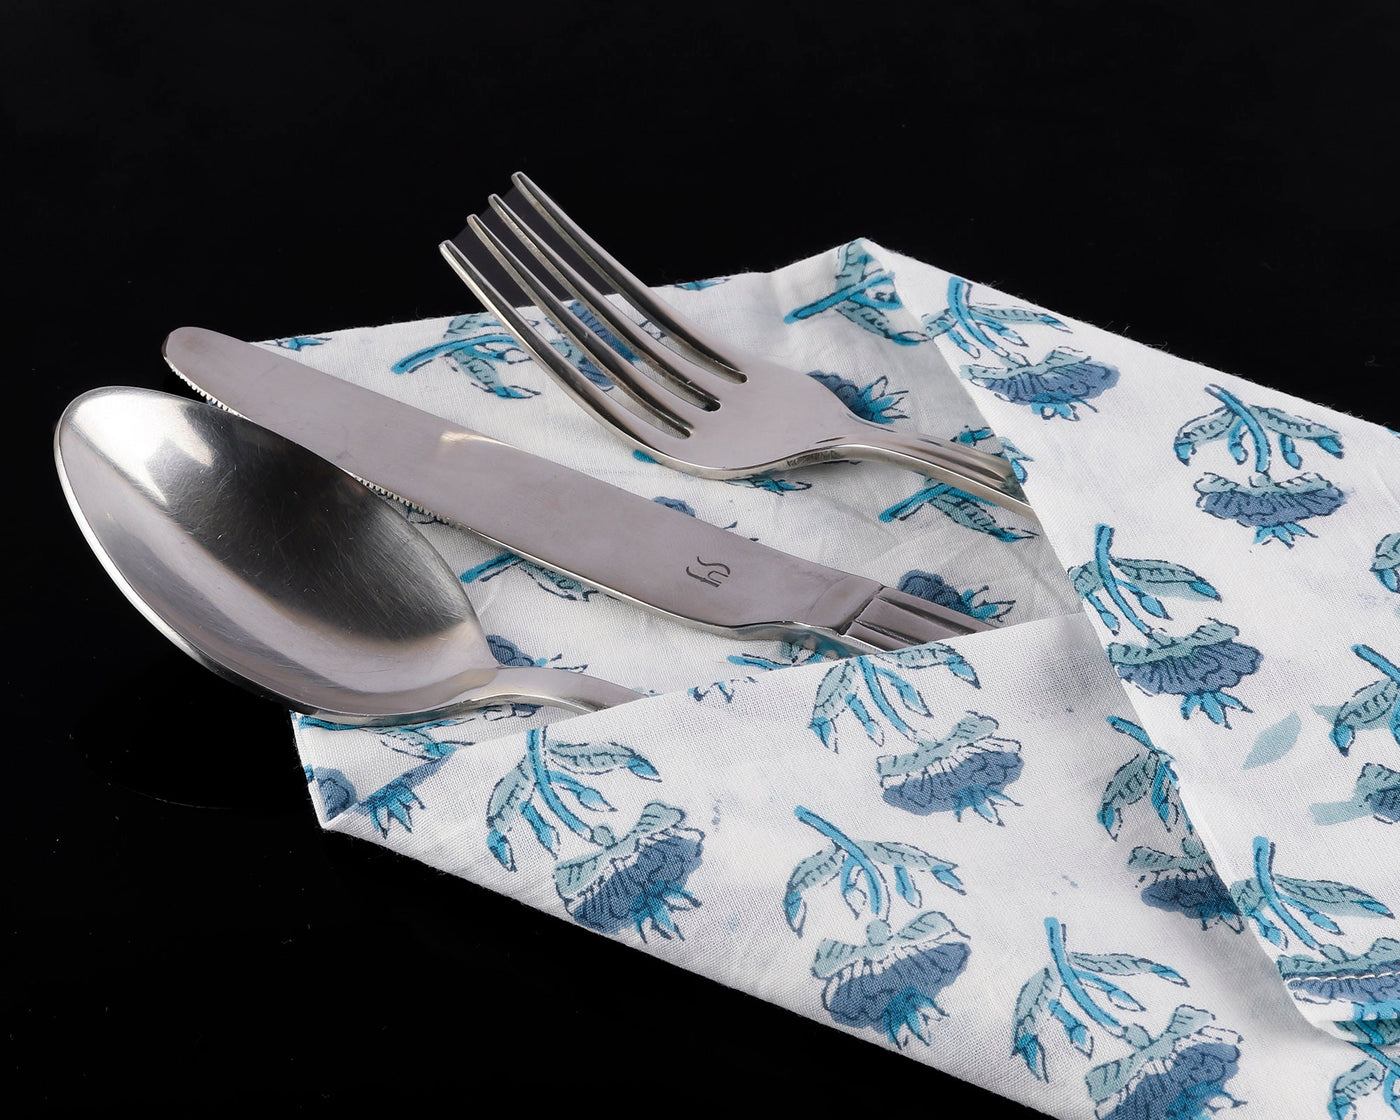 Carolina, Teal and Stone Blue Indian Floral Hand Block Printed Pure Cotton Cloth Napkins, 18x18"- Cocktail Napkins, 20x20"- Dinner Napkins